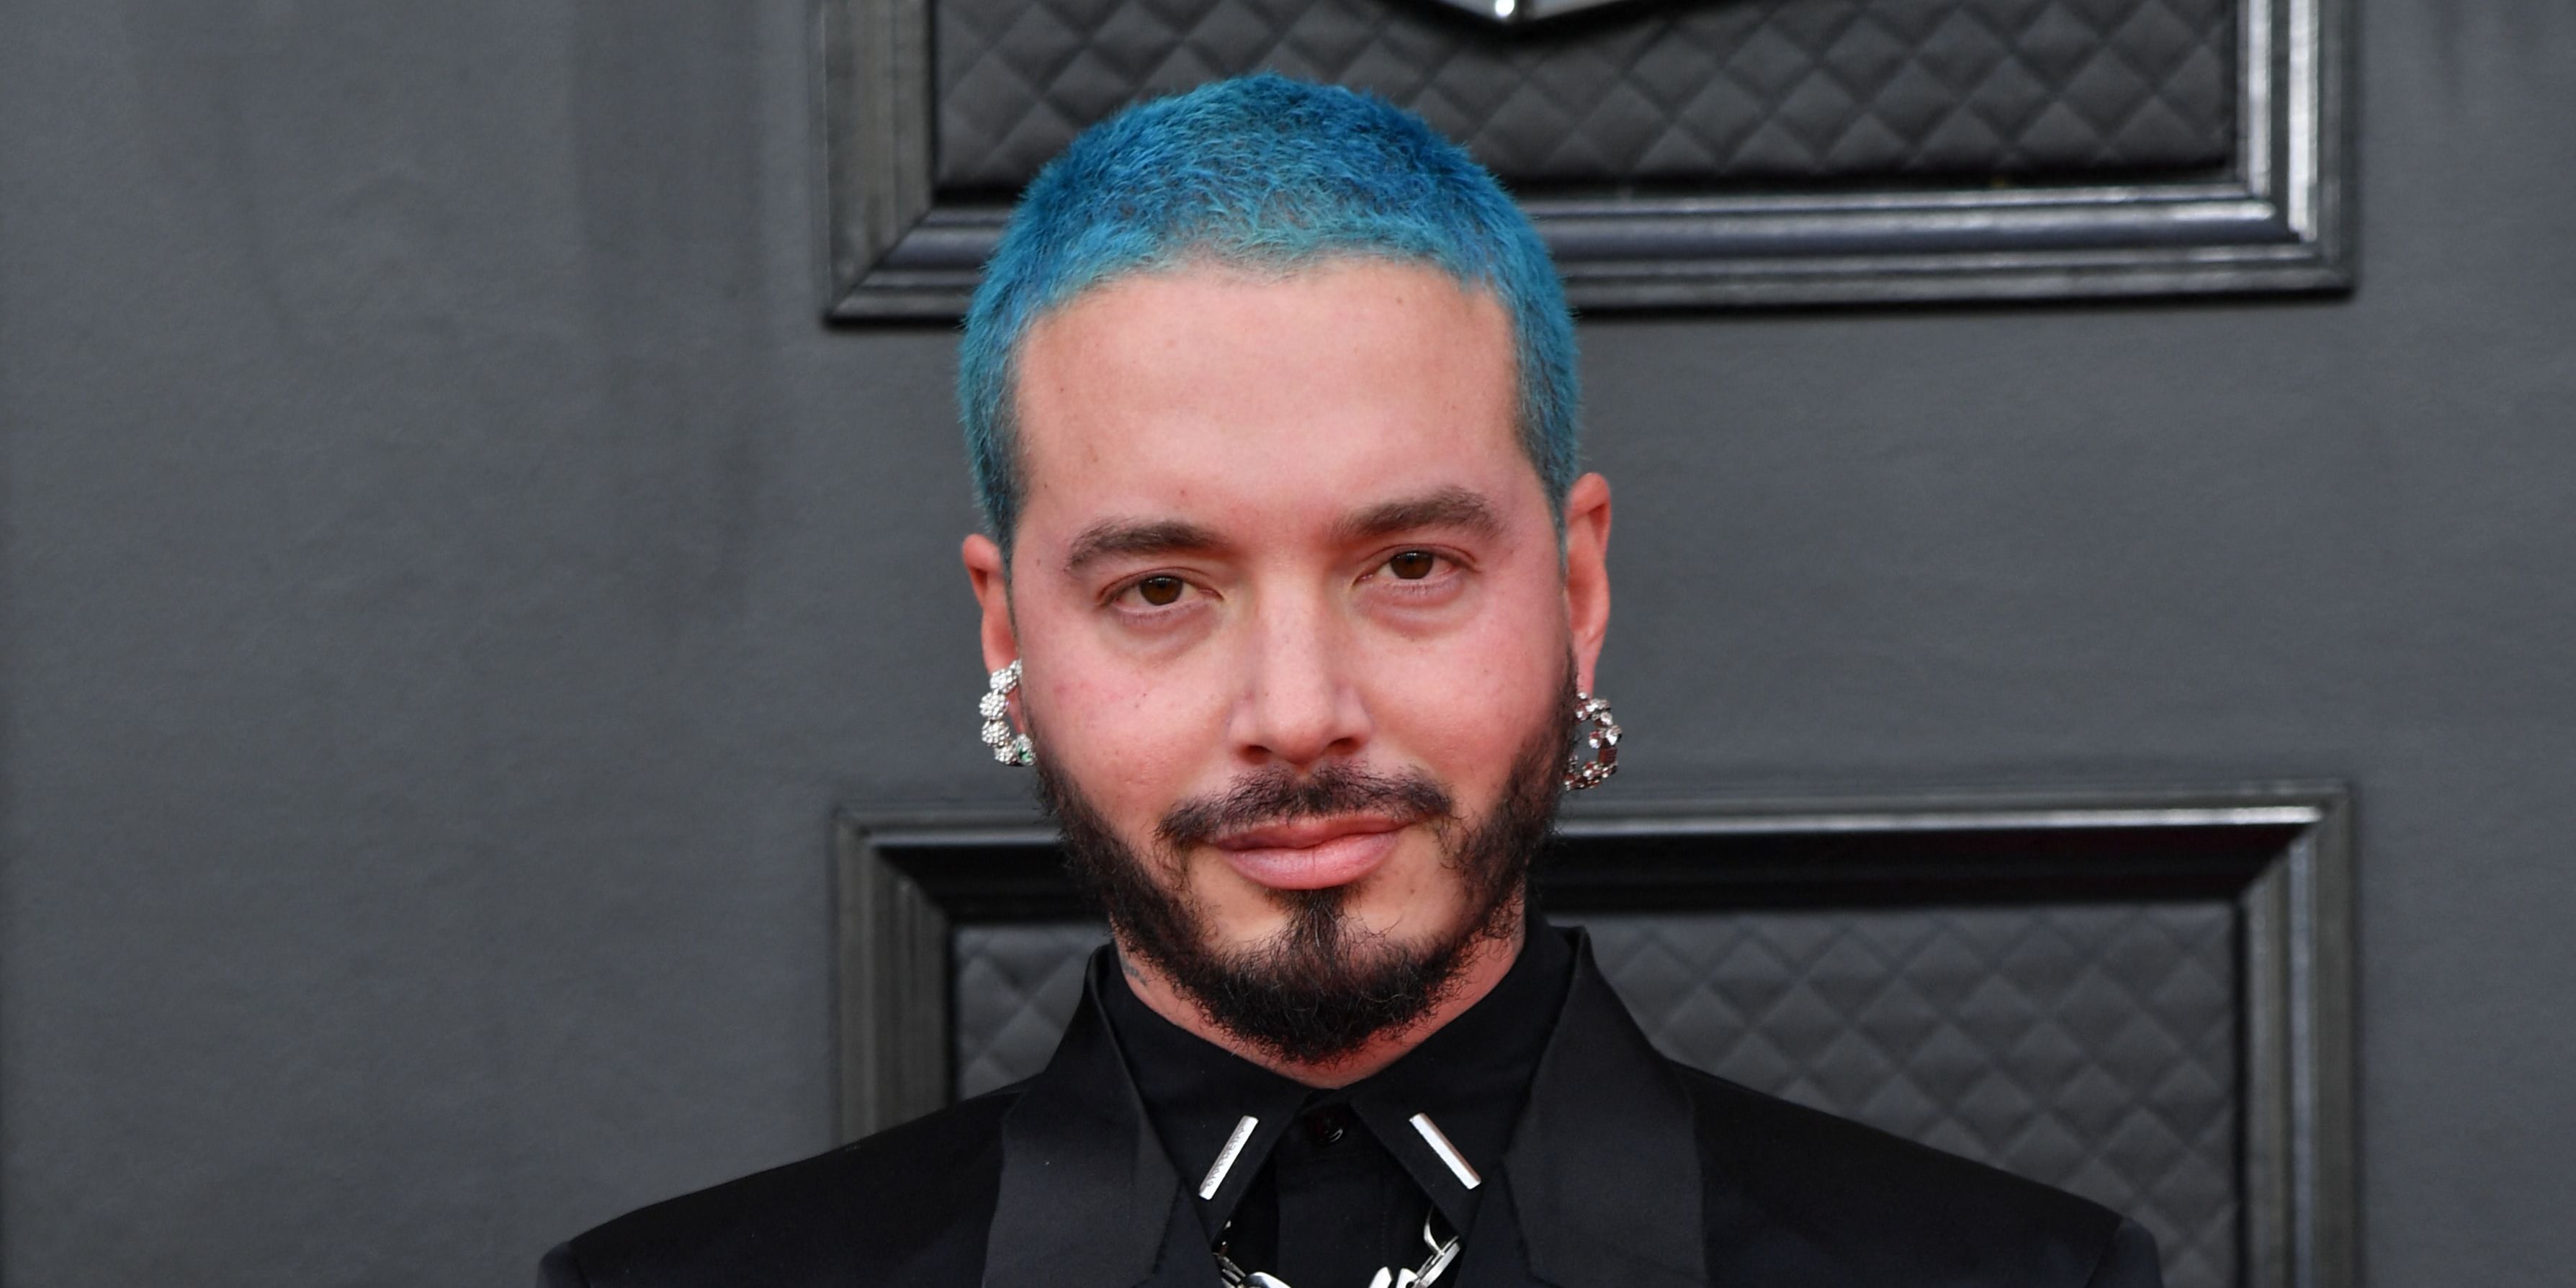 J Balvin at the Grammys 2022: the wild look of the red carpet